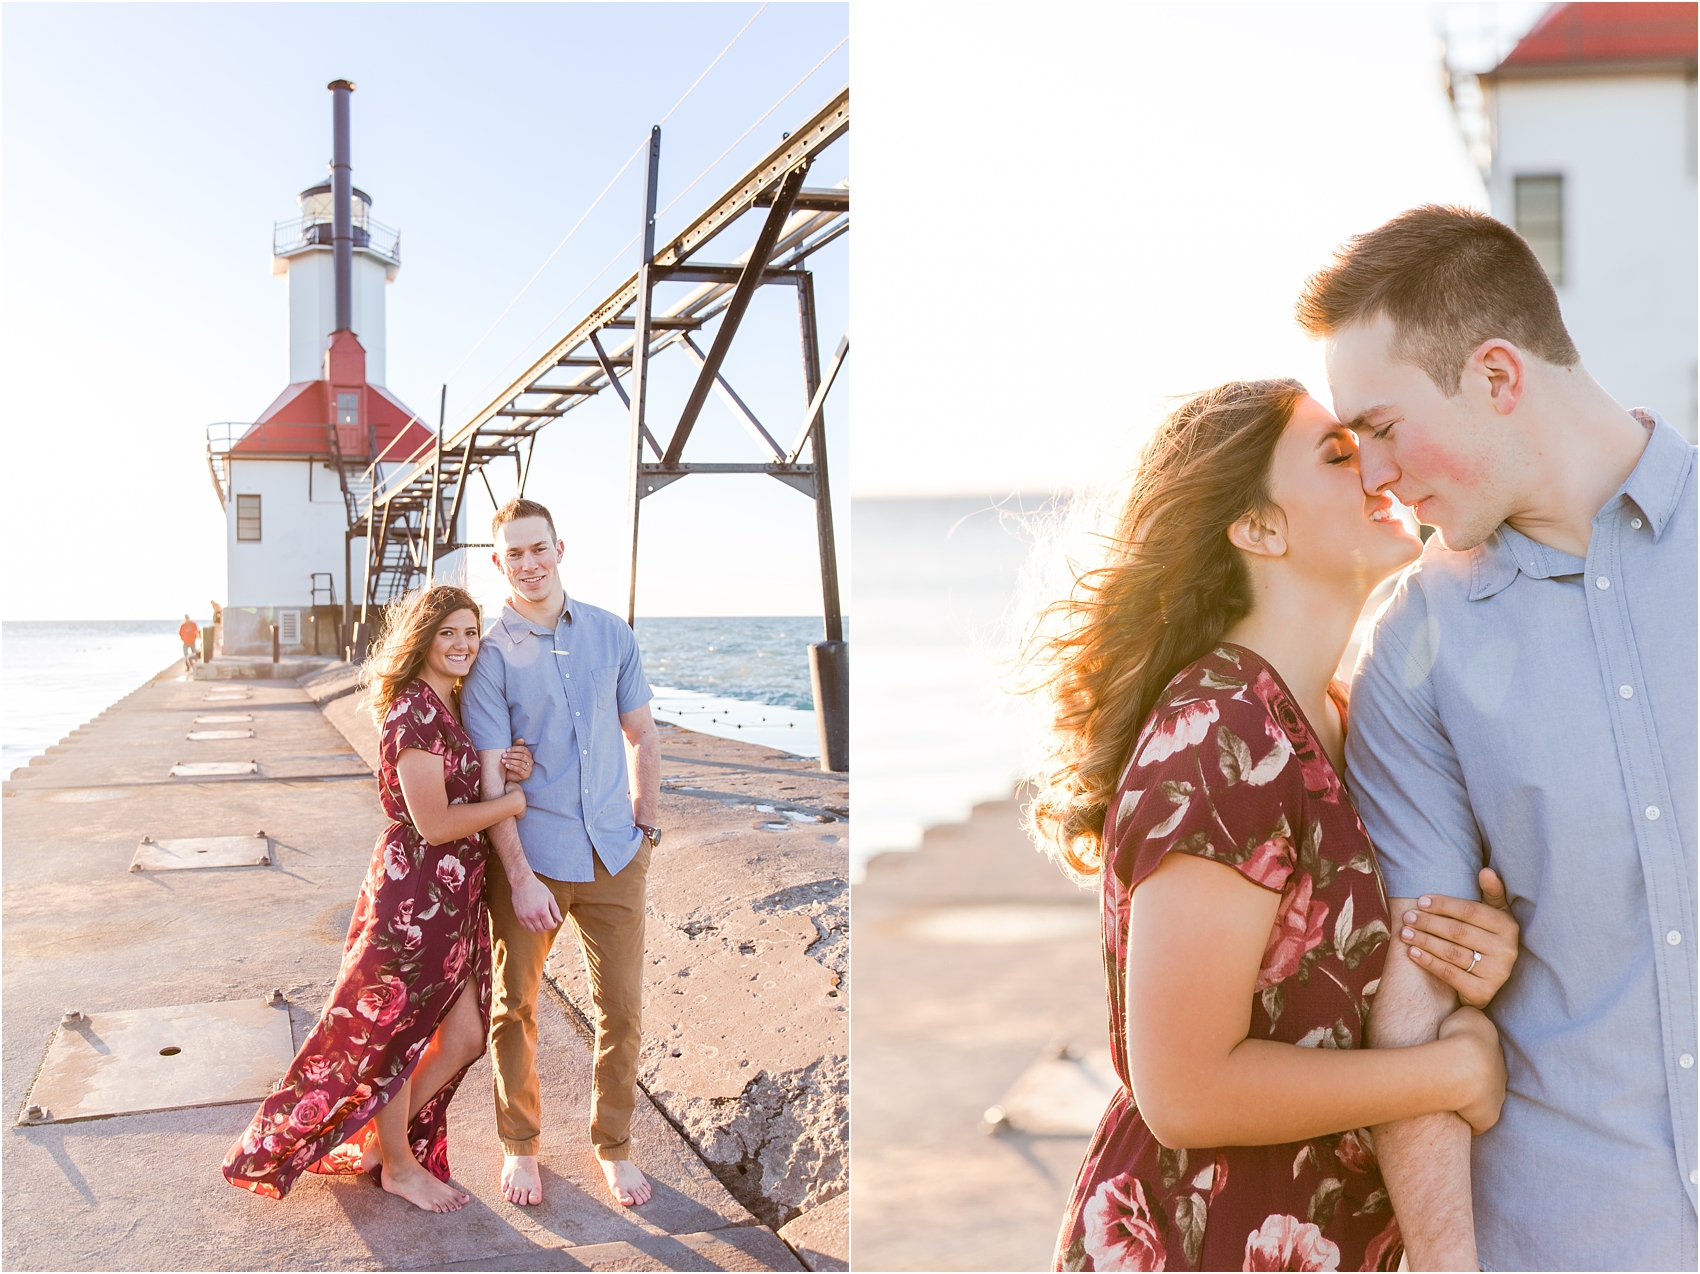 candid-end-of-summer-sunset-engagement-photos-at-silver-beach-in-st-joseph-mi-by-courtney-carolyn-photography_0013.jpg